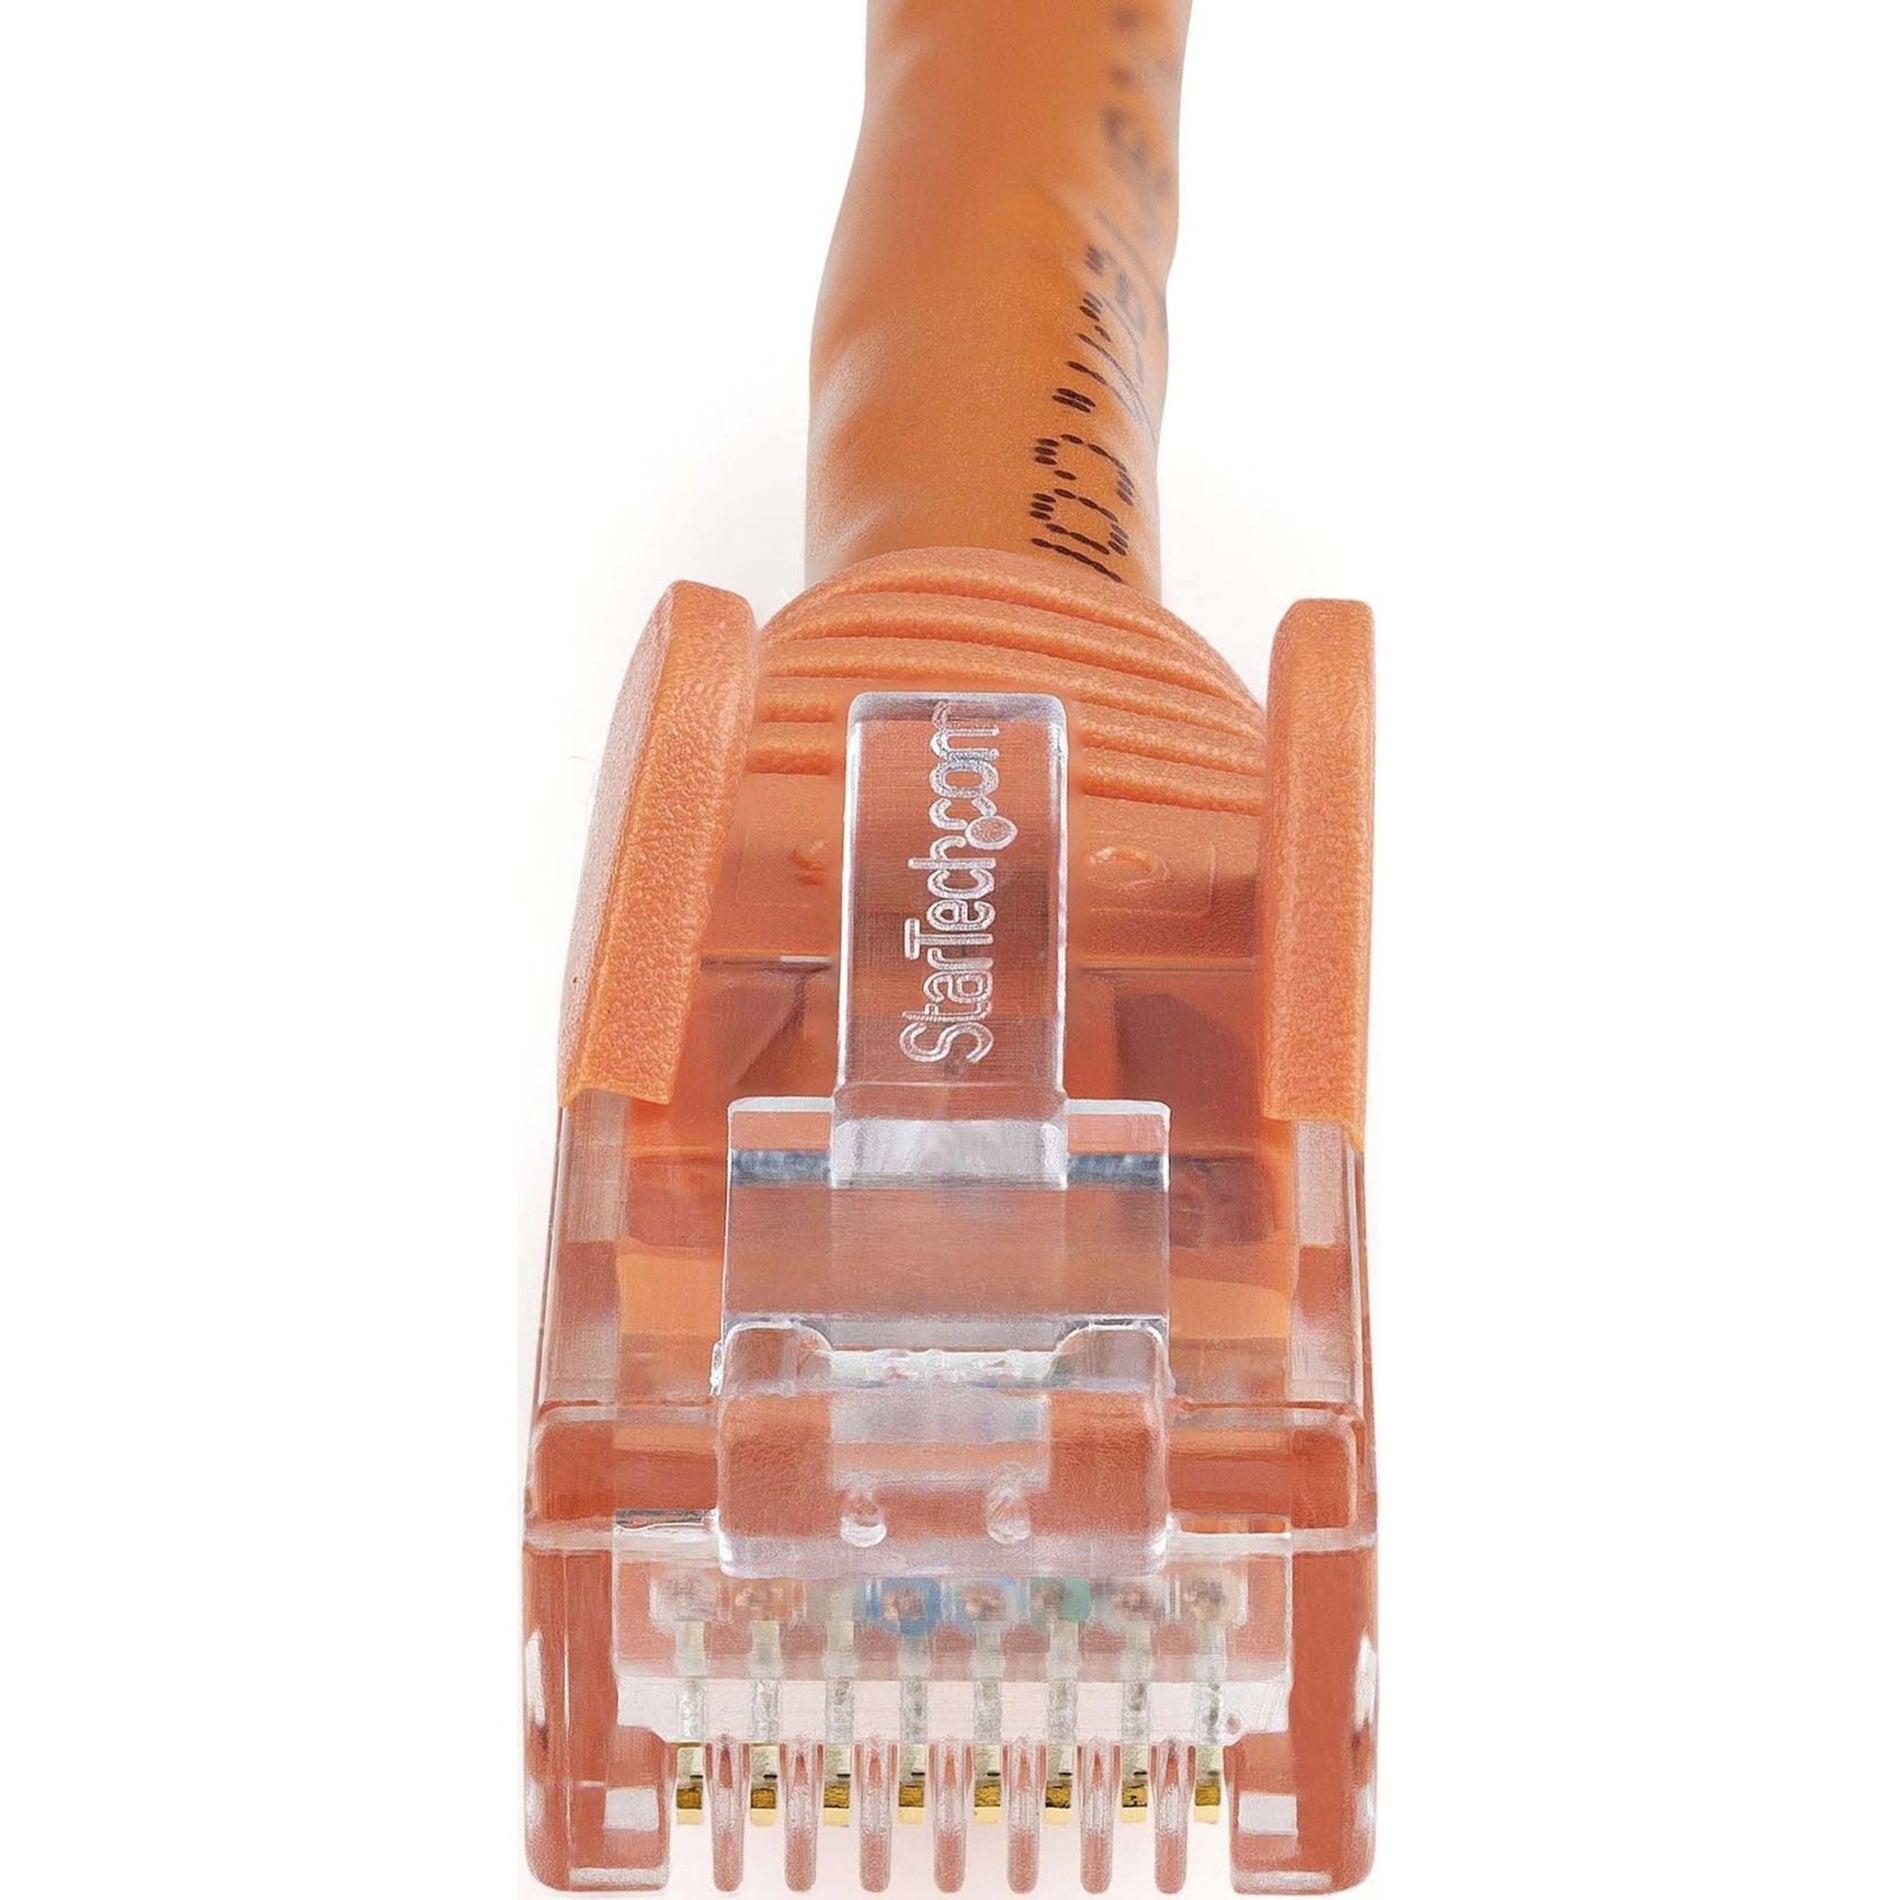 StarTech.com N6PATCH35OR 35 ft Orange Snagless Cat6 UTP Patch Cable, Lifetime Warranty, 10 Gbit/s Data Transfer Rate, RJ45 Connector Clip Protectors